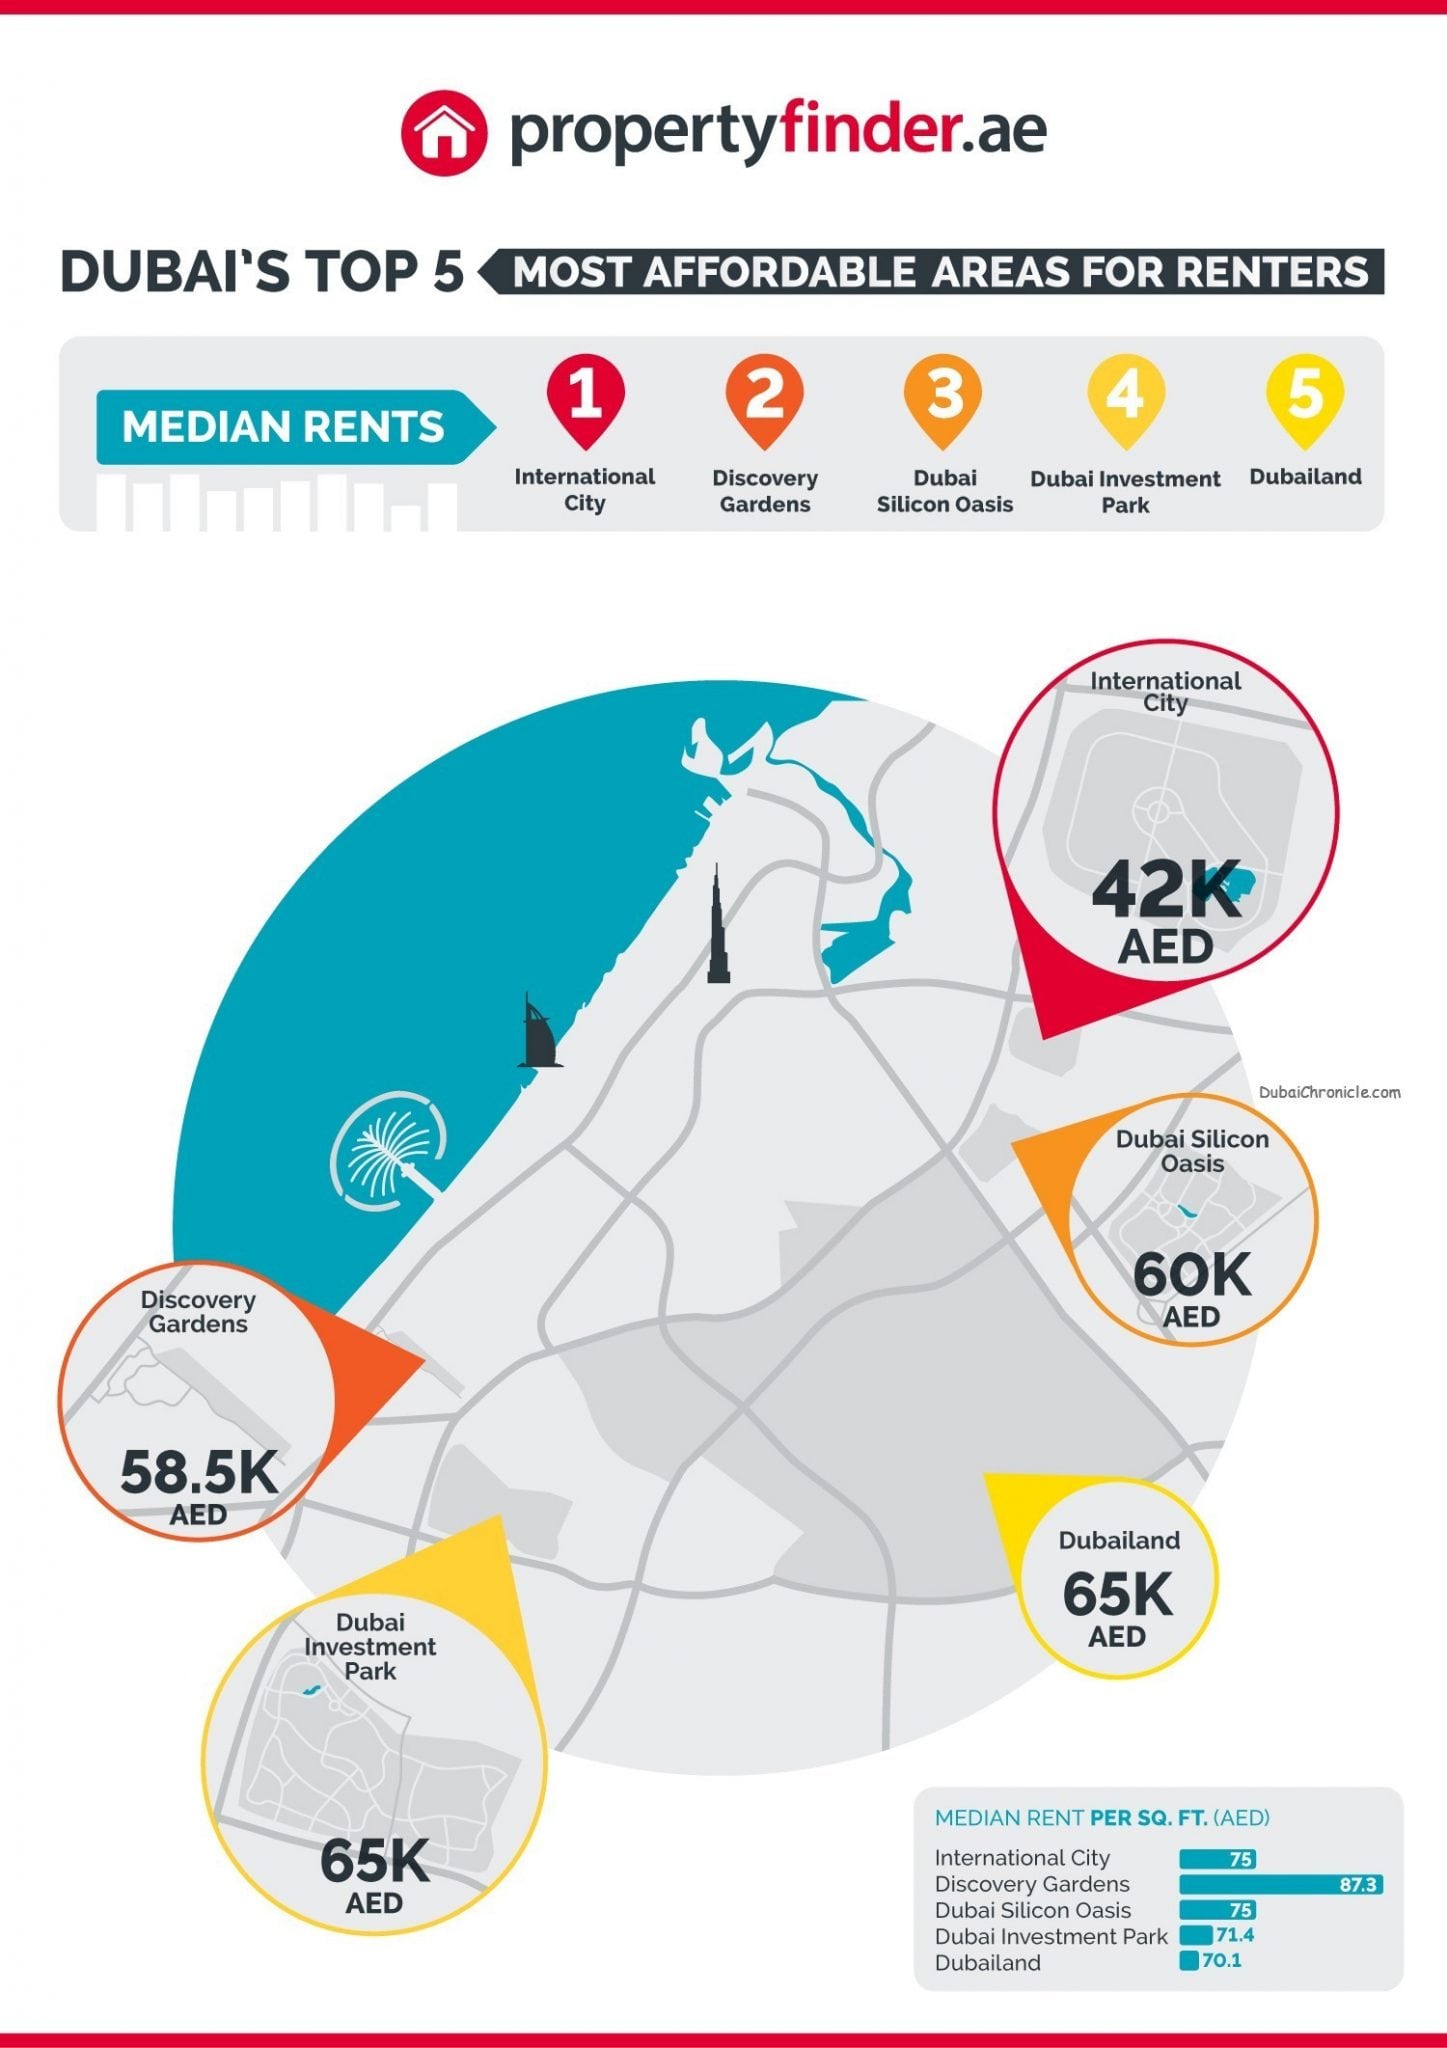 Dubai's top 5 most affordable areas for renters propertyfinder.ae